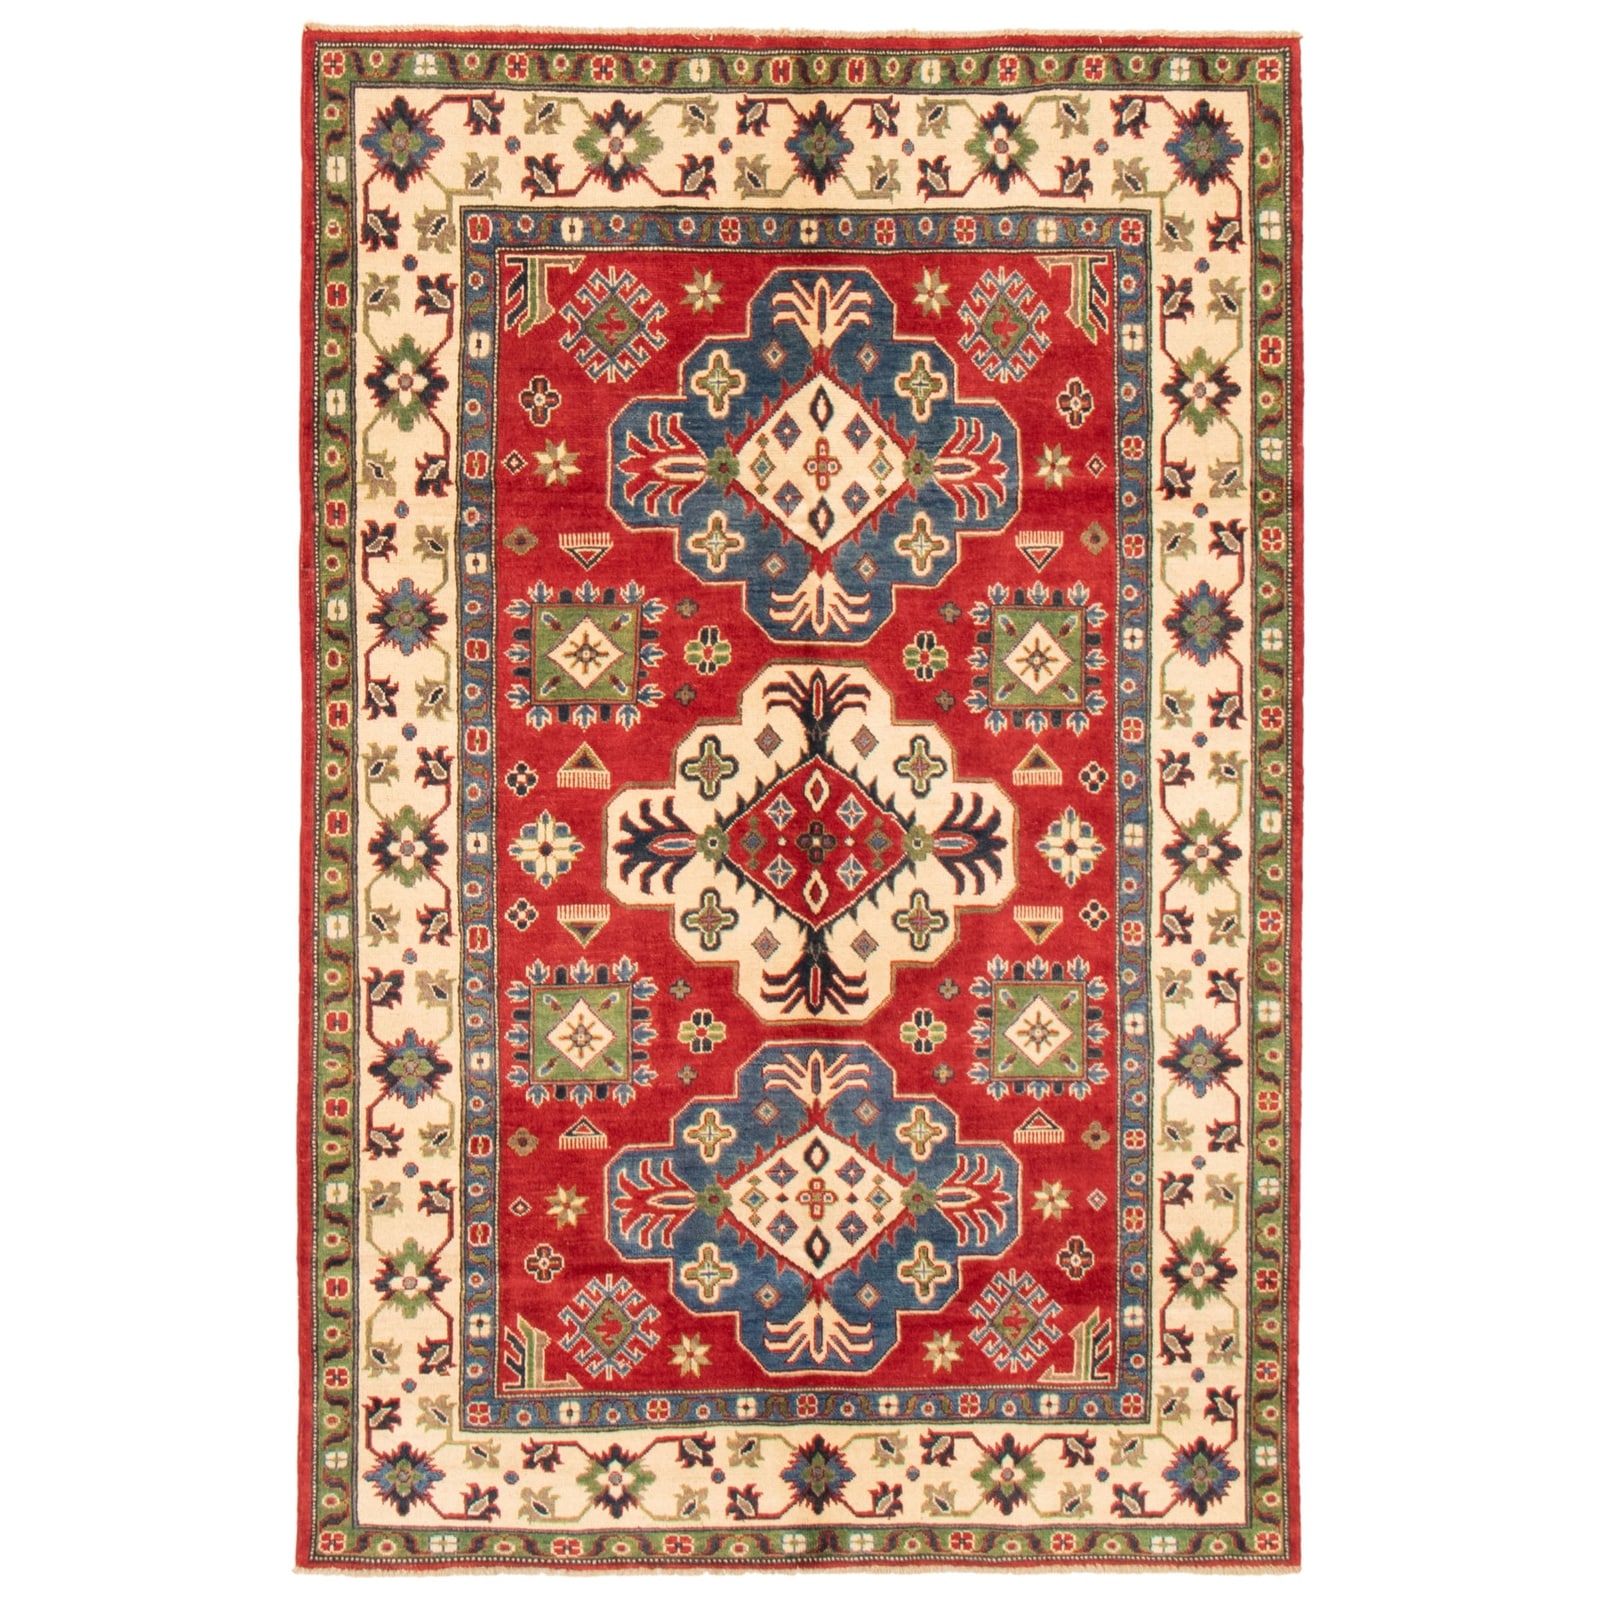 Hand-Knotted Wool Rug eCarpet Gallery Large Area Rug for Living Room Bedroom 360352 Finest Ghazni Bordered Red Rug 6'10 x 9'11 